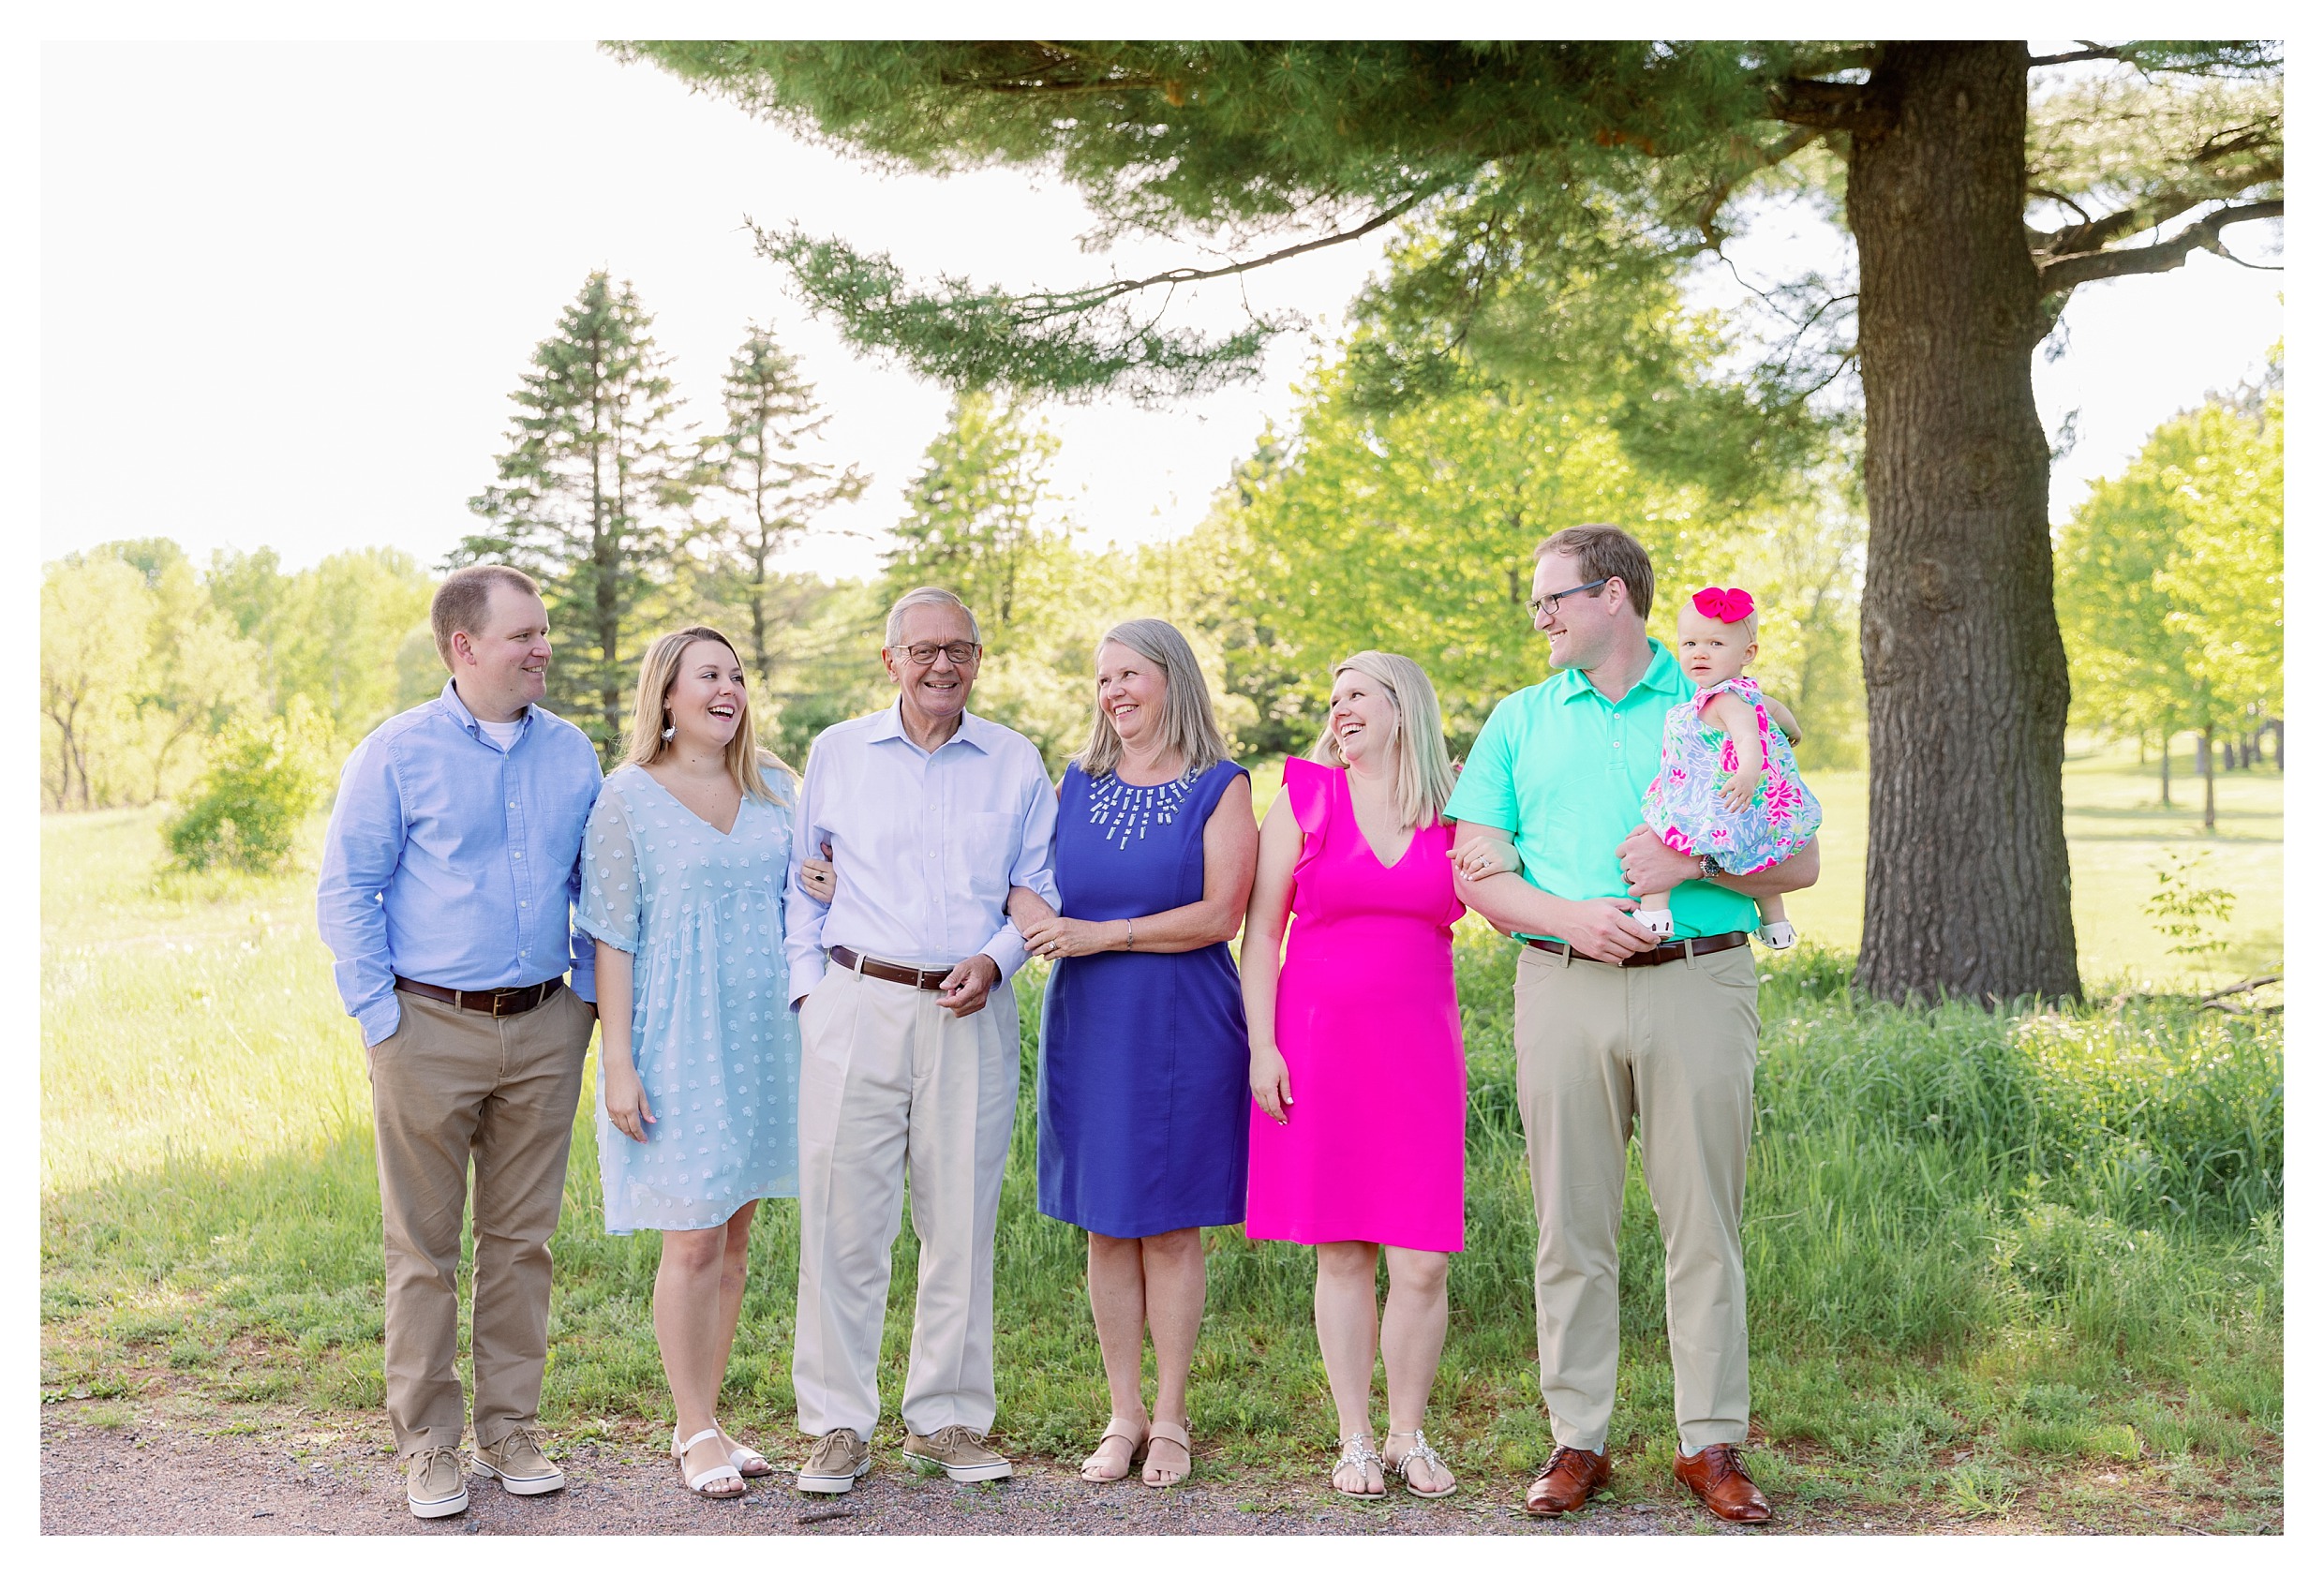 Large family poses while laughing at Sunnyvale Park in Wausau